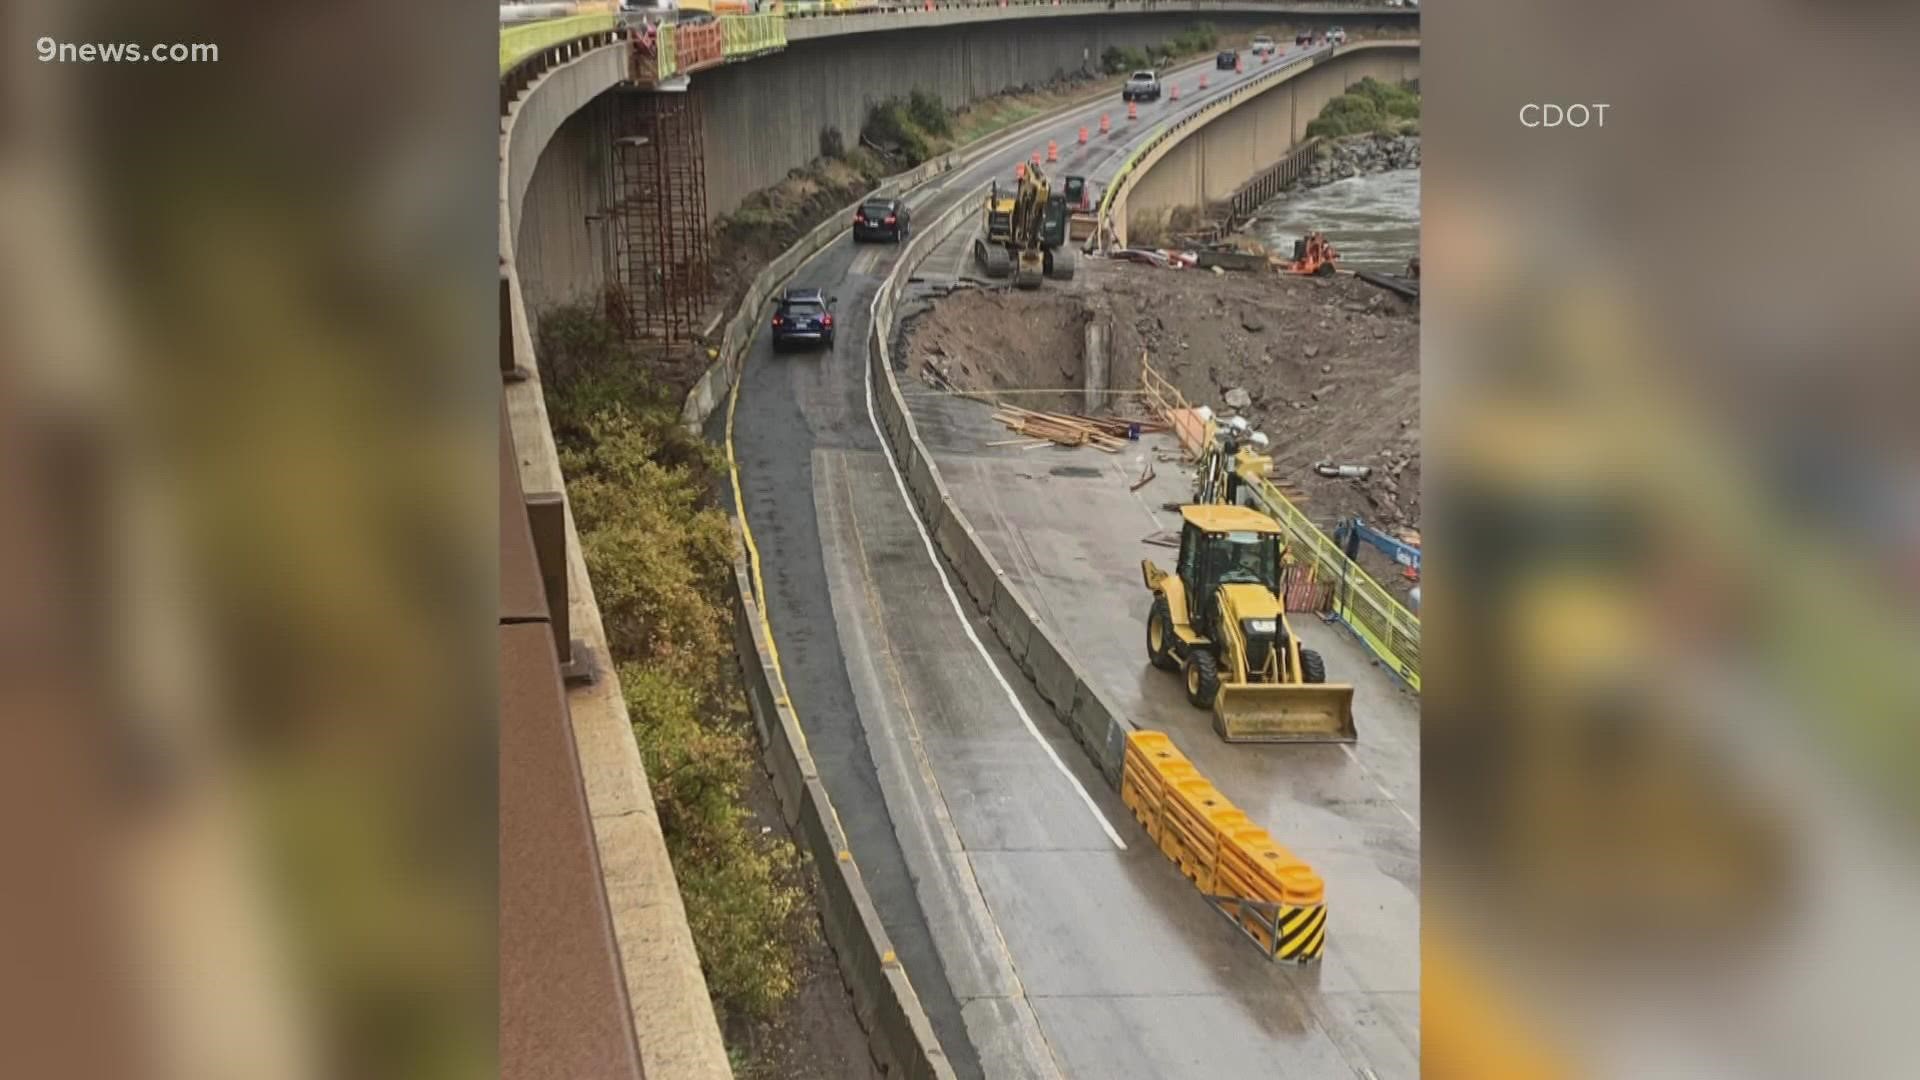 The Colorado Dept. of Transportation said crews have finished repair work on I-70 through Glenwood Canyon after the mudslides in summer 2020.